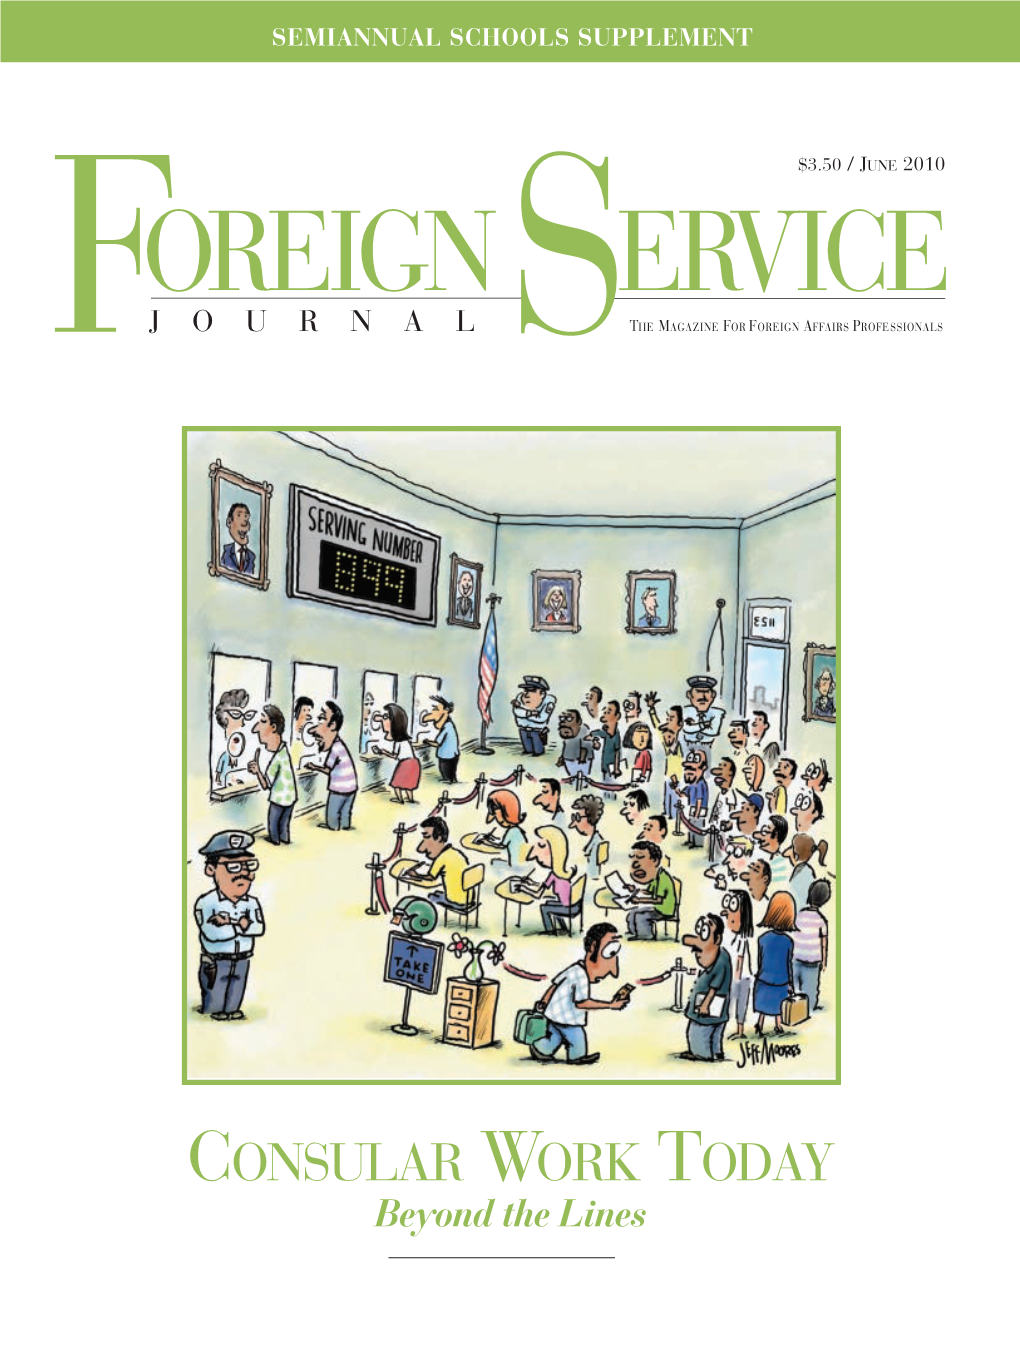 The Foreign Service Journal, June 2010